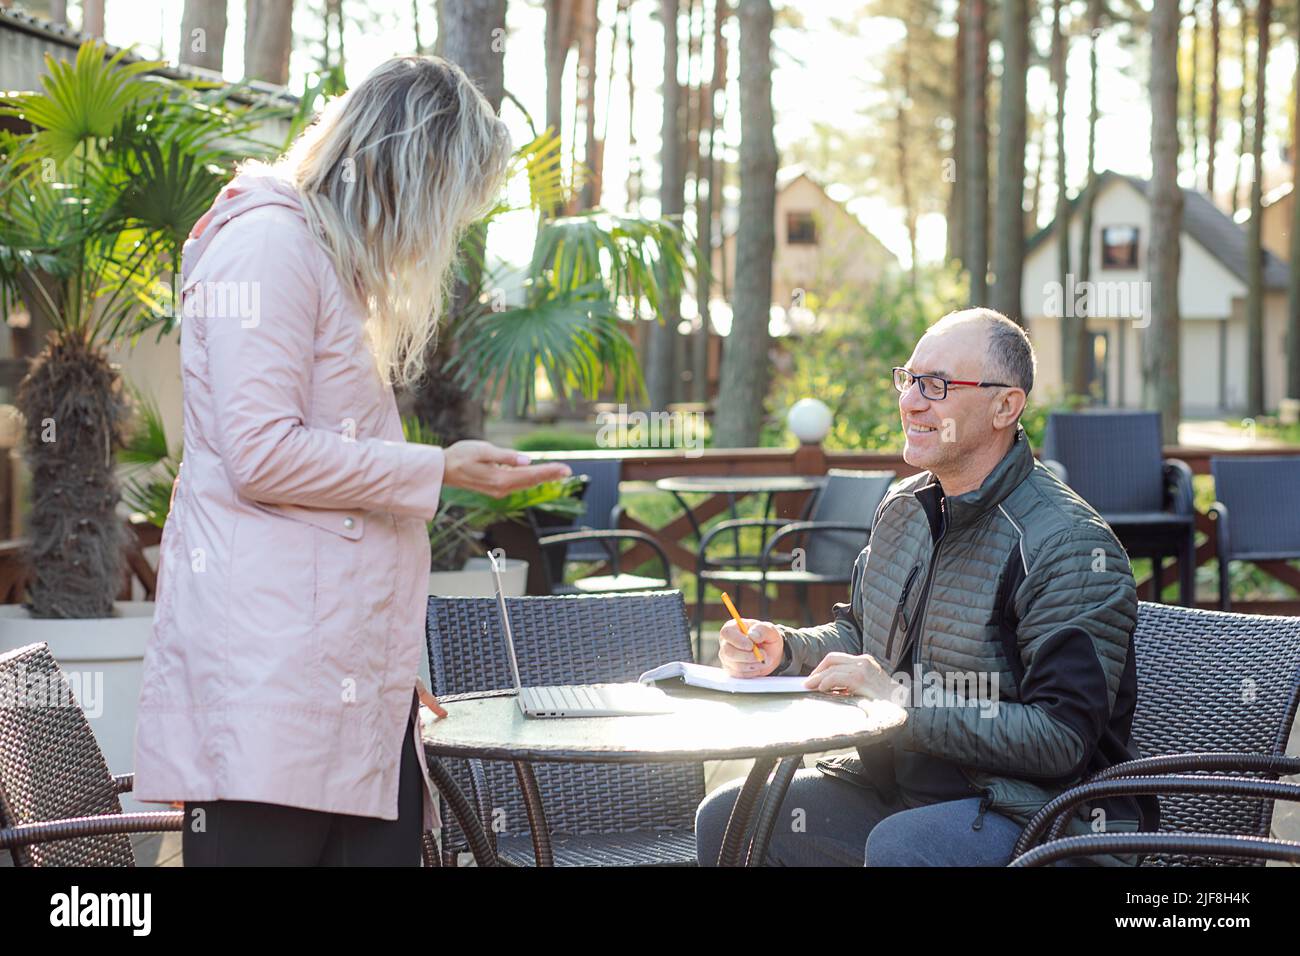 Portrait of smiling middle-aged man father writing down notes in notepad, listening to young woman daughter in cafe. Stock Photo